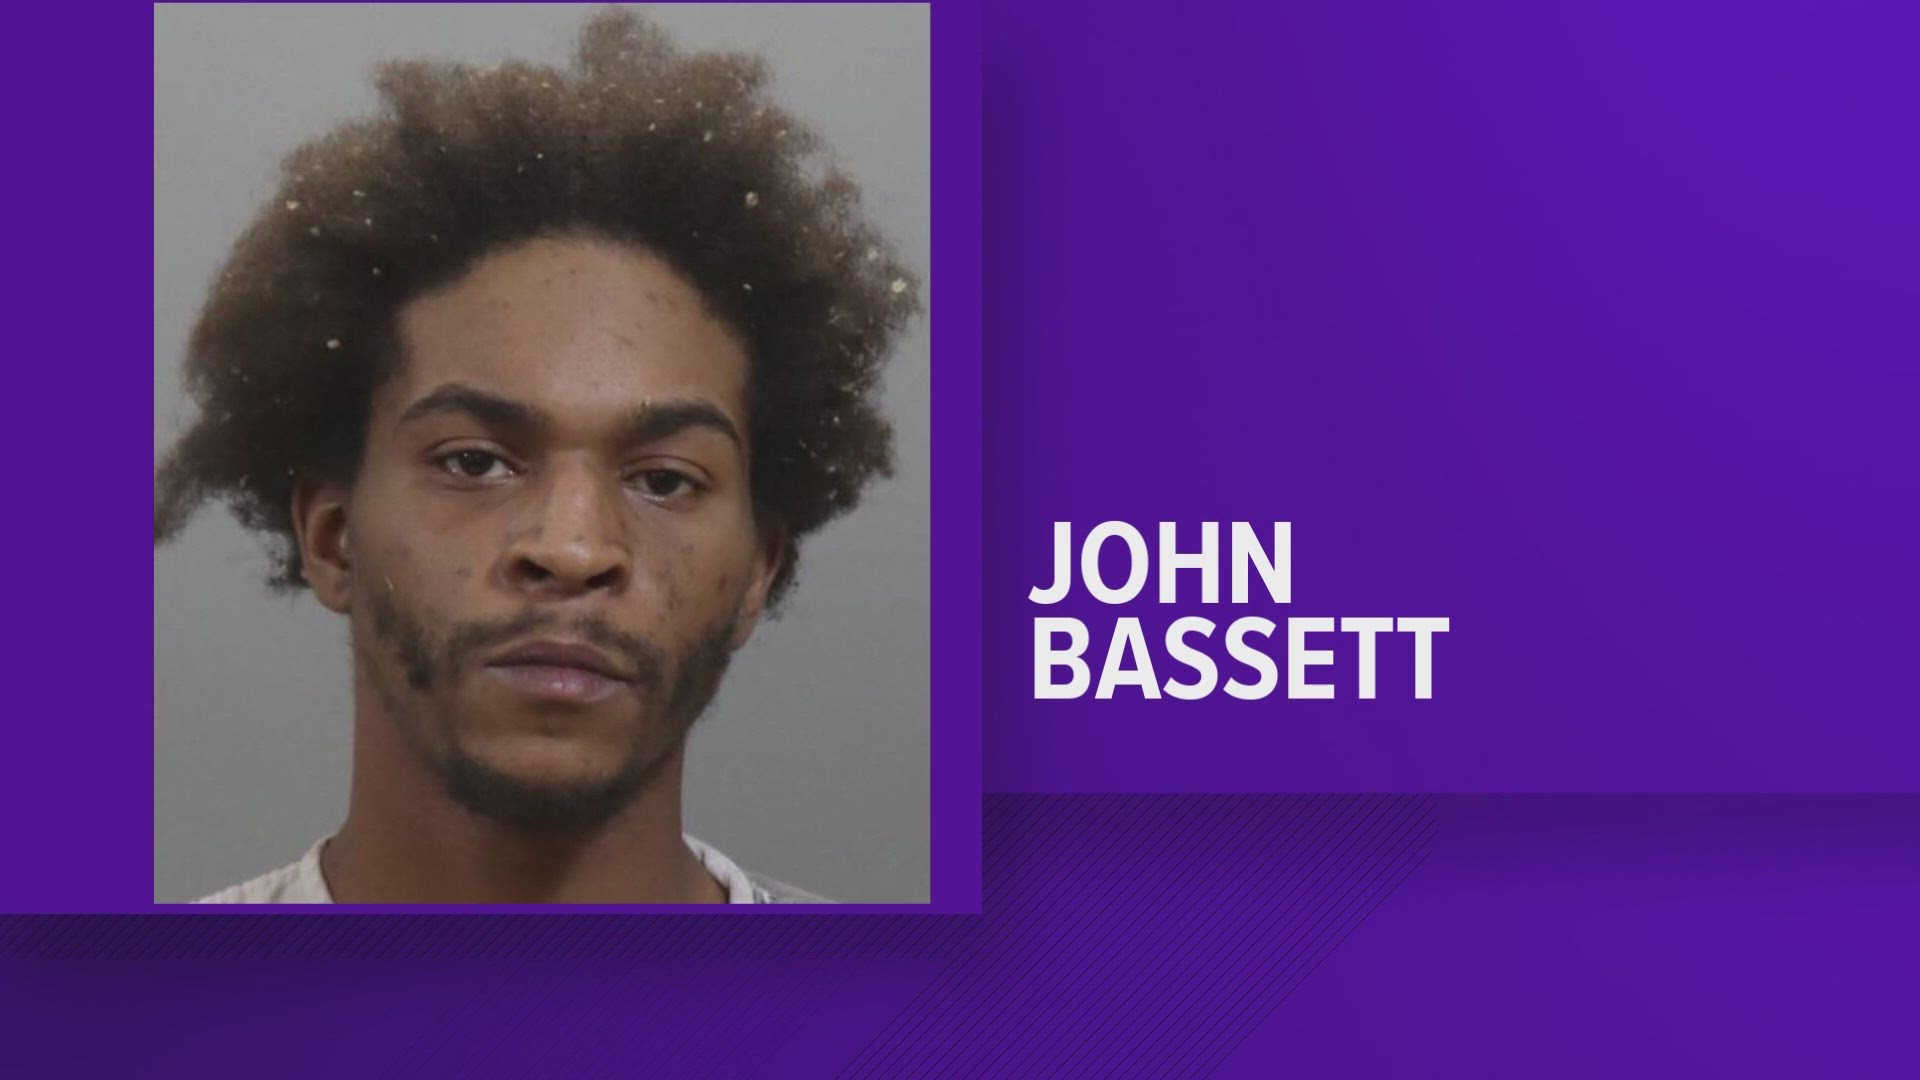 John Bassett was sentenced to life without parole for the death of Desheena Kyle.